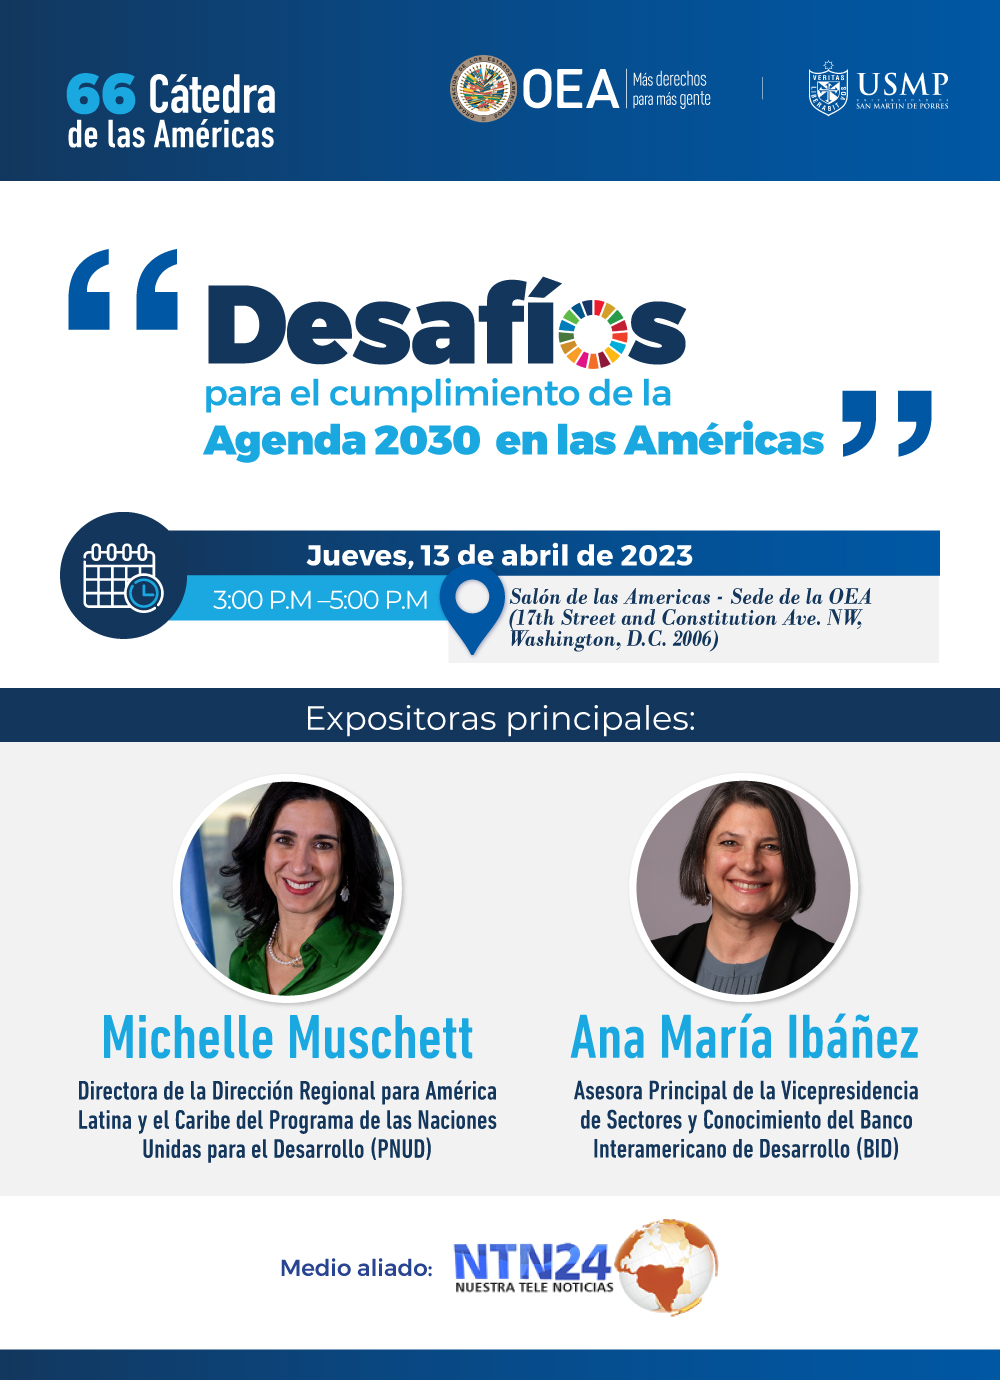 OAS Lecture Series of the Americas Focuses on "Perspectives on Diplomacy from the OAS"